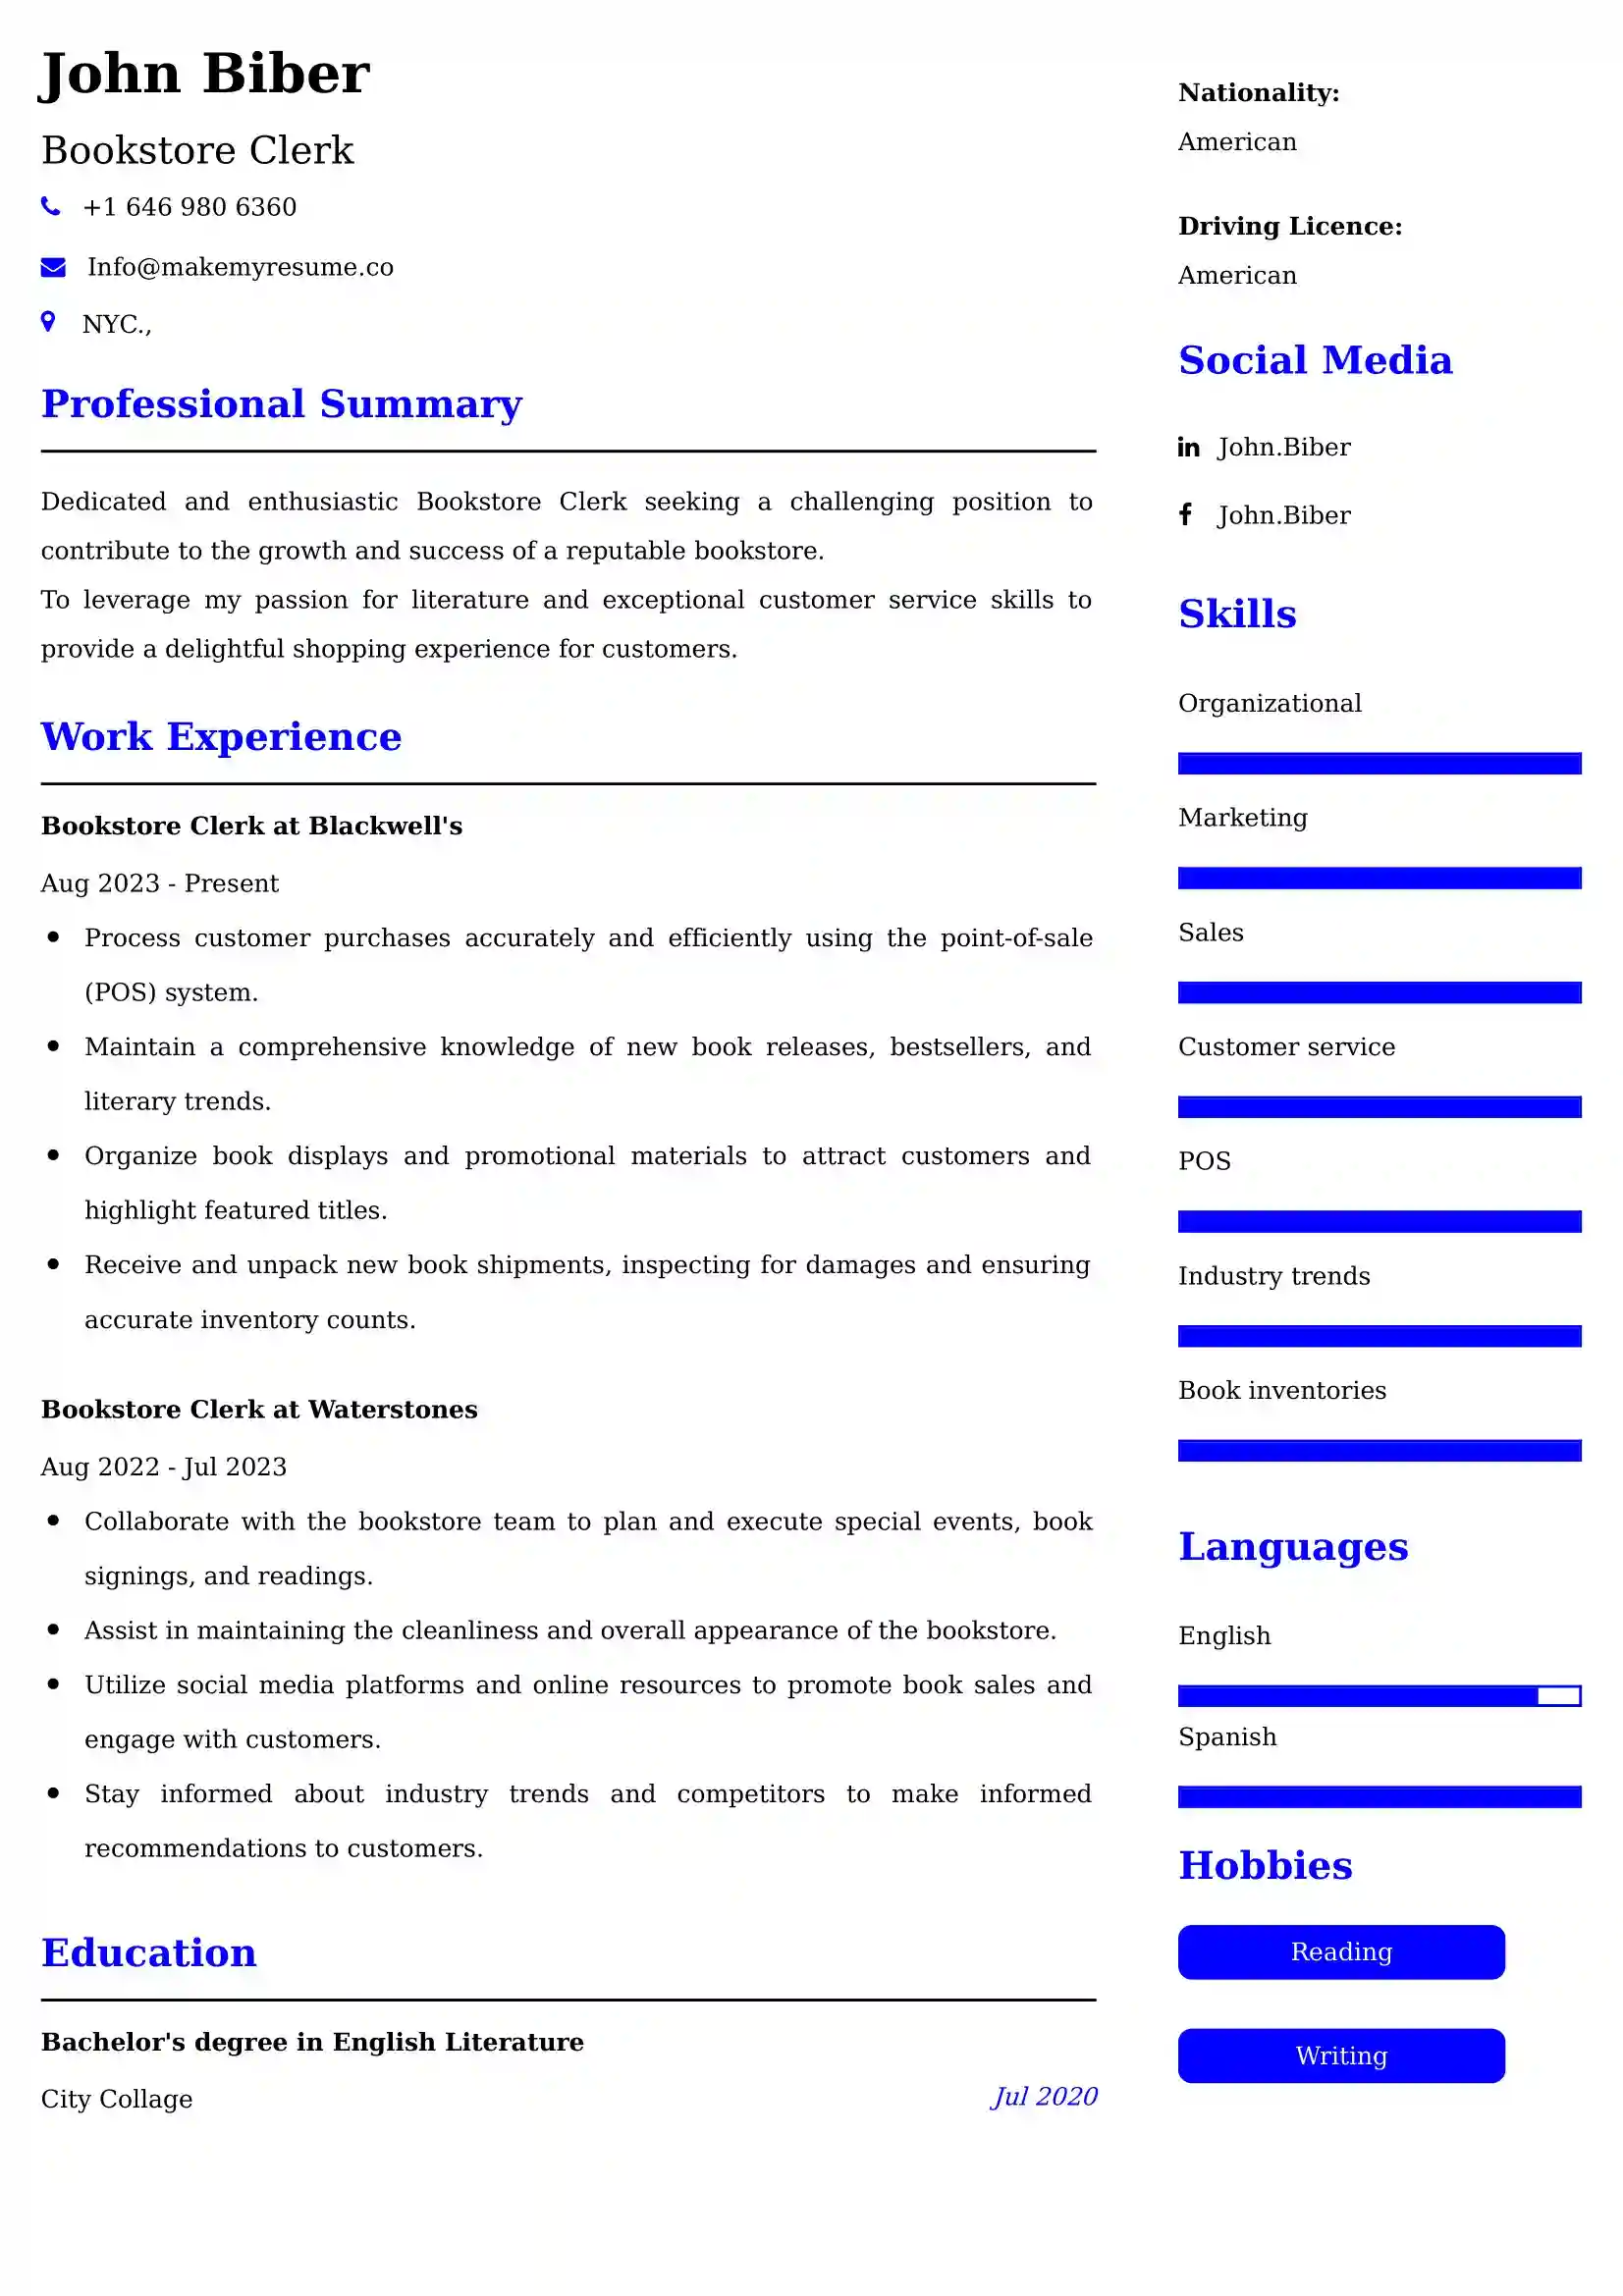 Bookstore Clerk Resume Examples - UK Format, Latest Template.